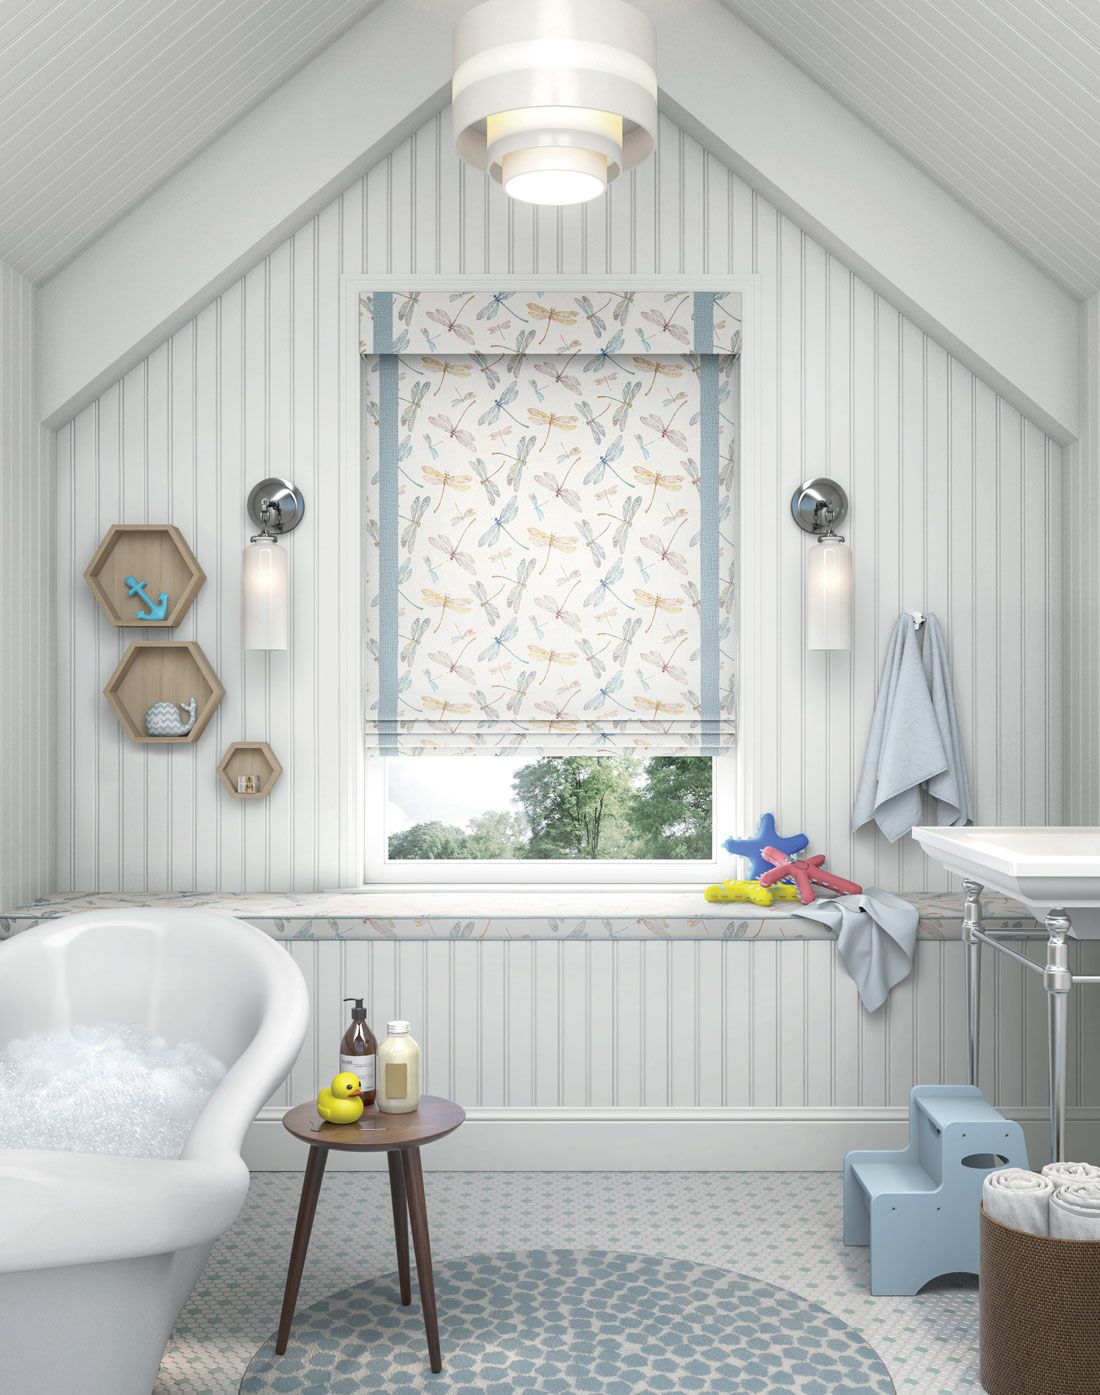 Interior Masterpieces® Fabric Shade with a playful dragonfly material and Fabric Wrapped Cornice hanging in a bathroom window with kid toys laying around and a bath tub full of suds